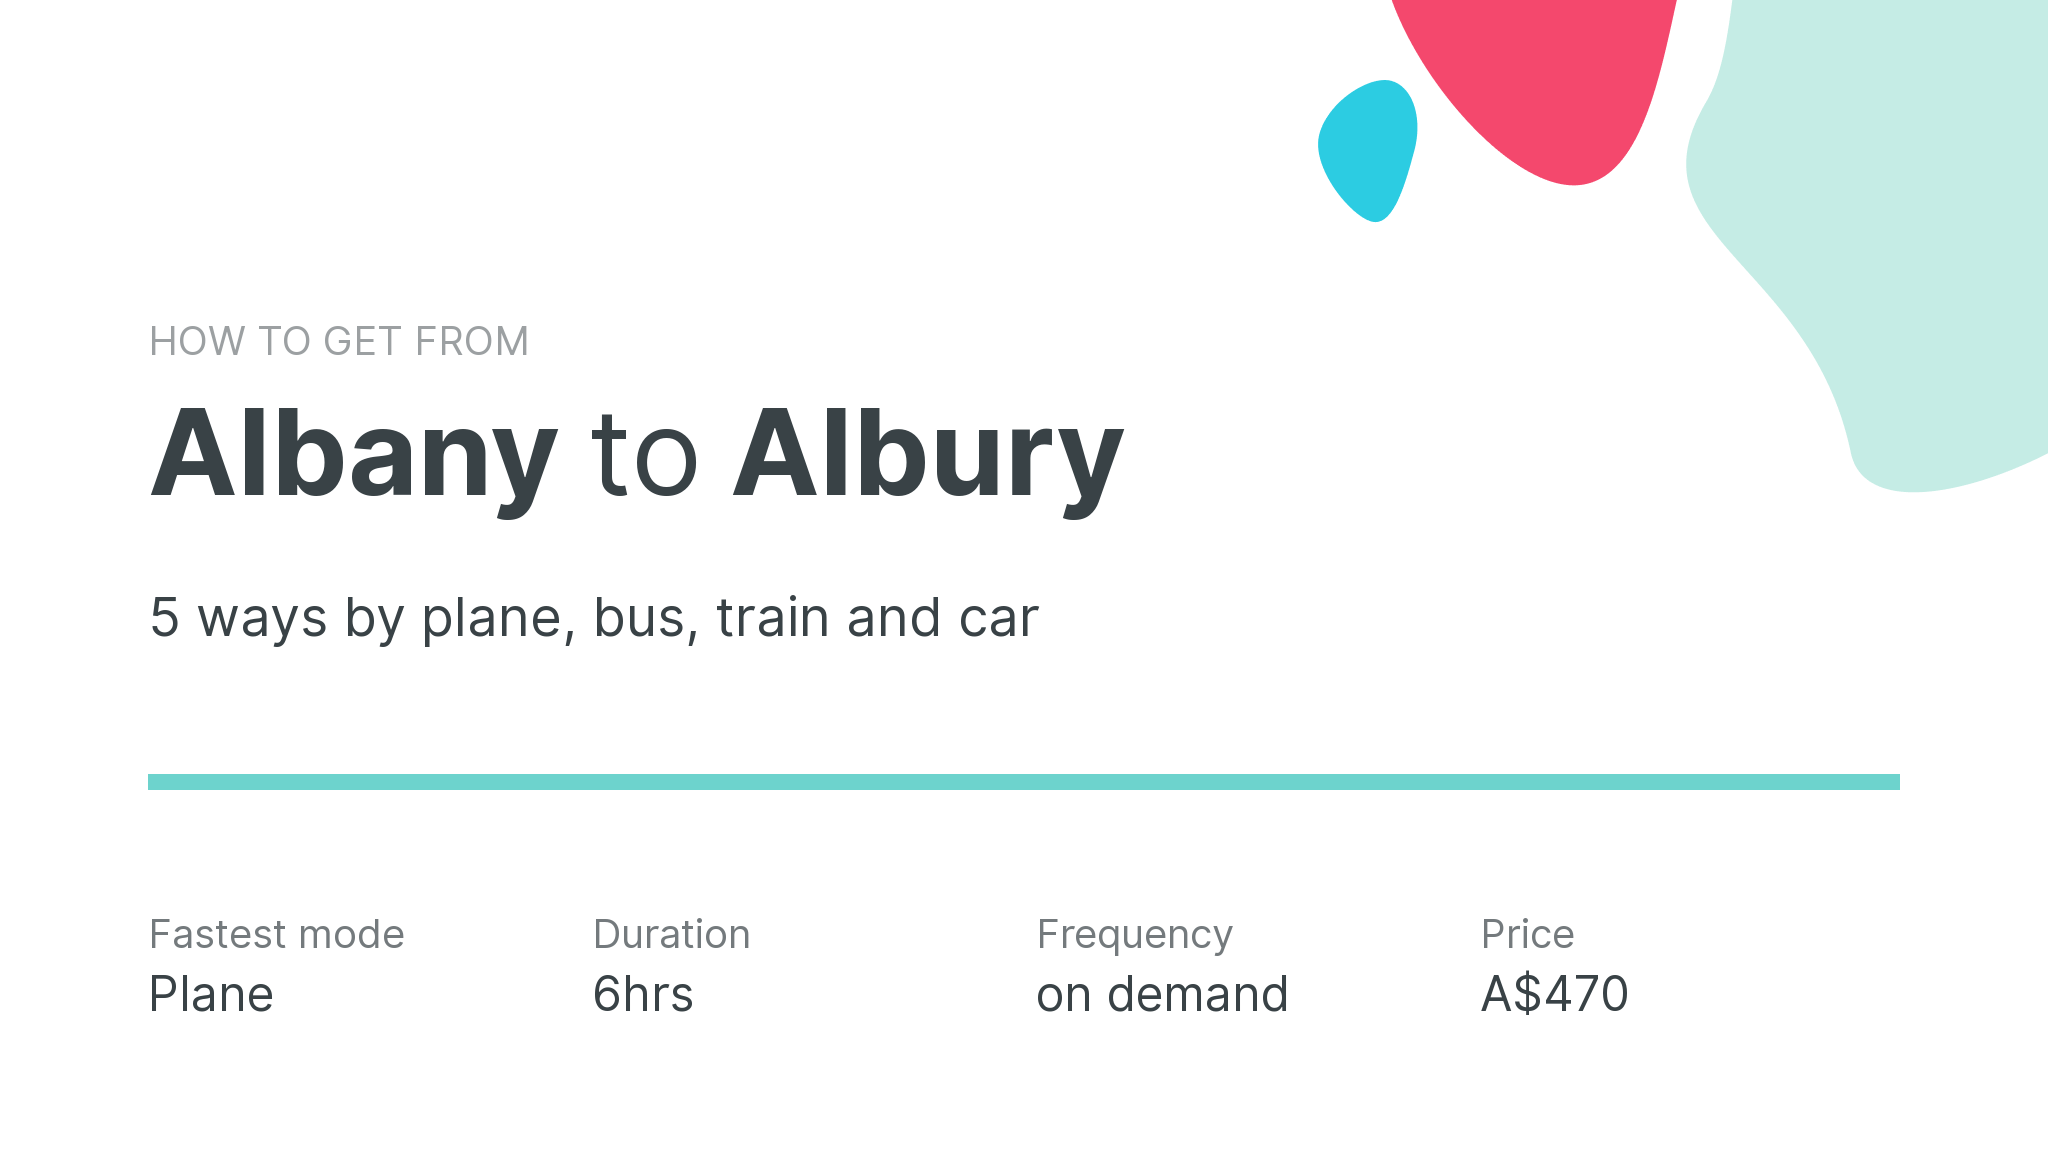 How do I get from Albany to Albury